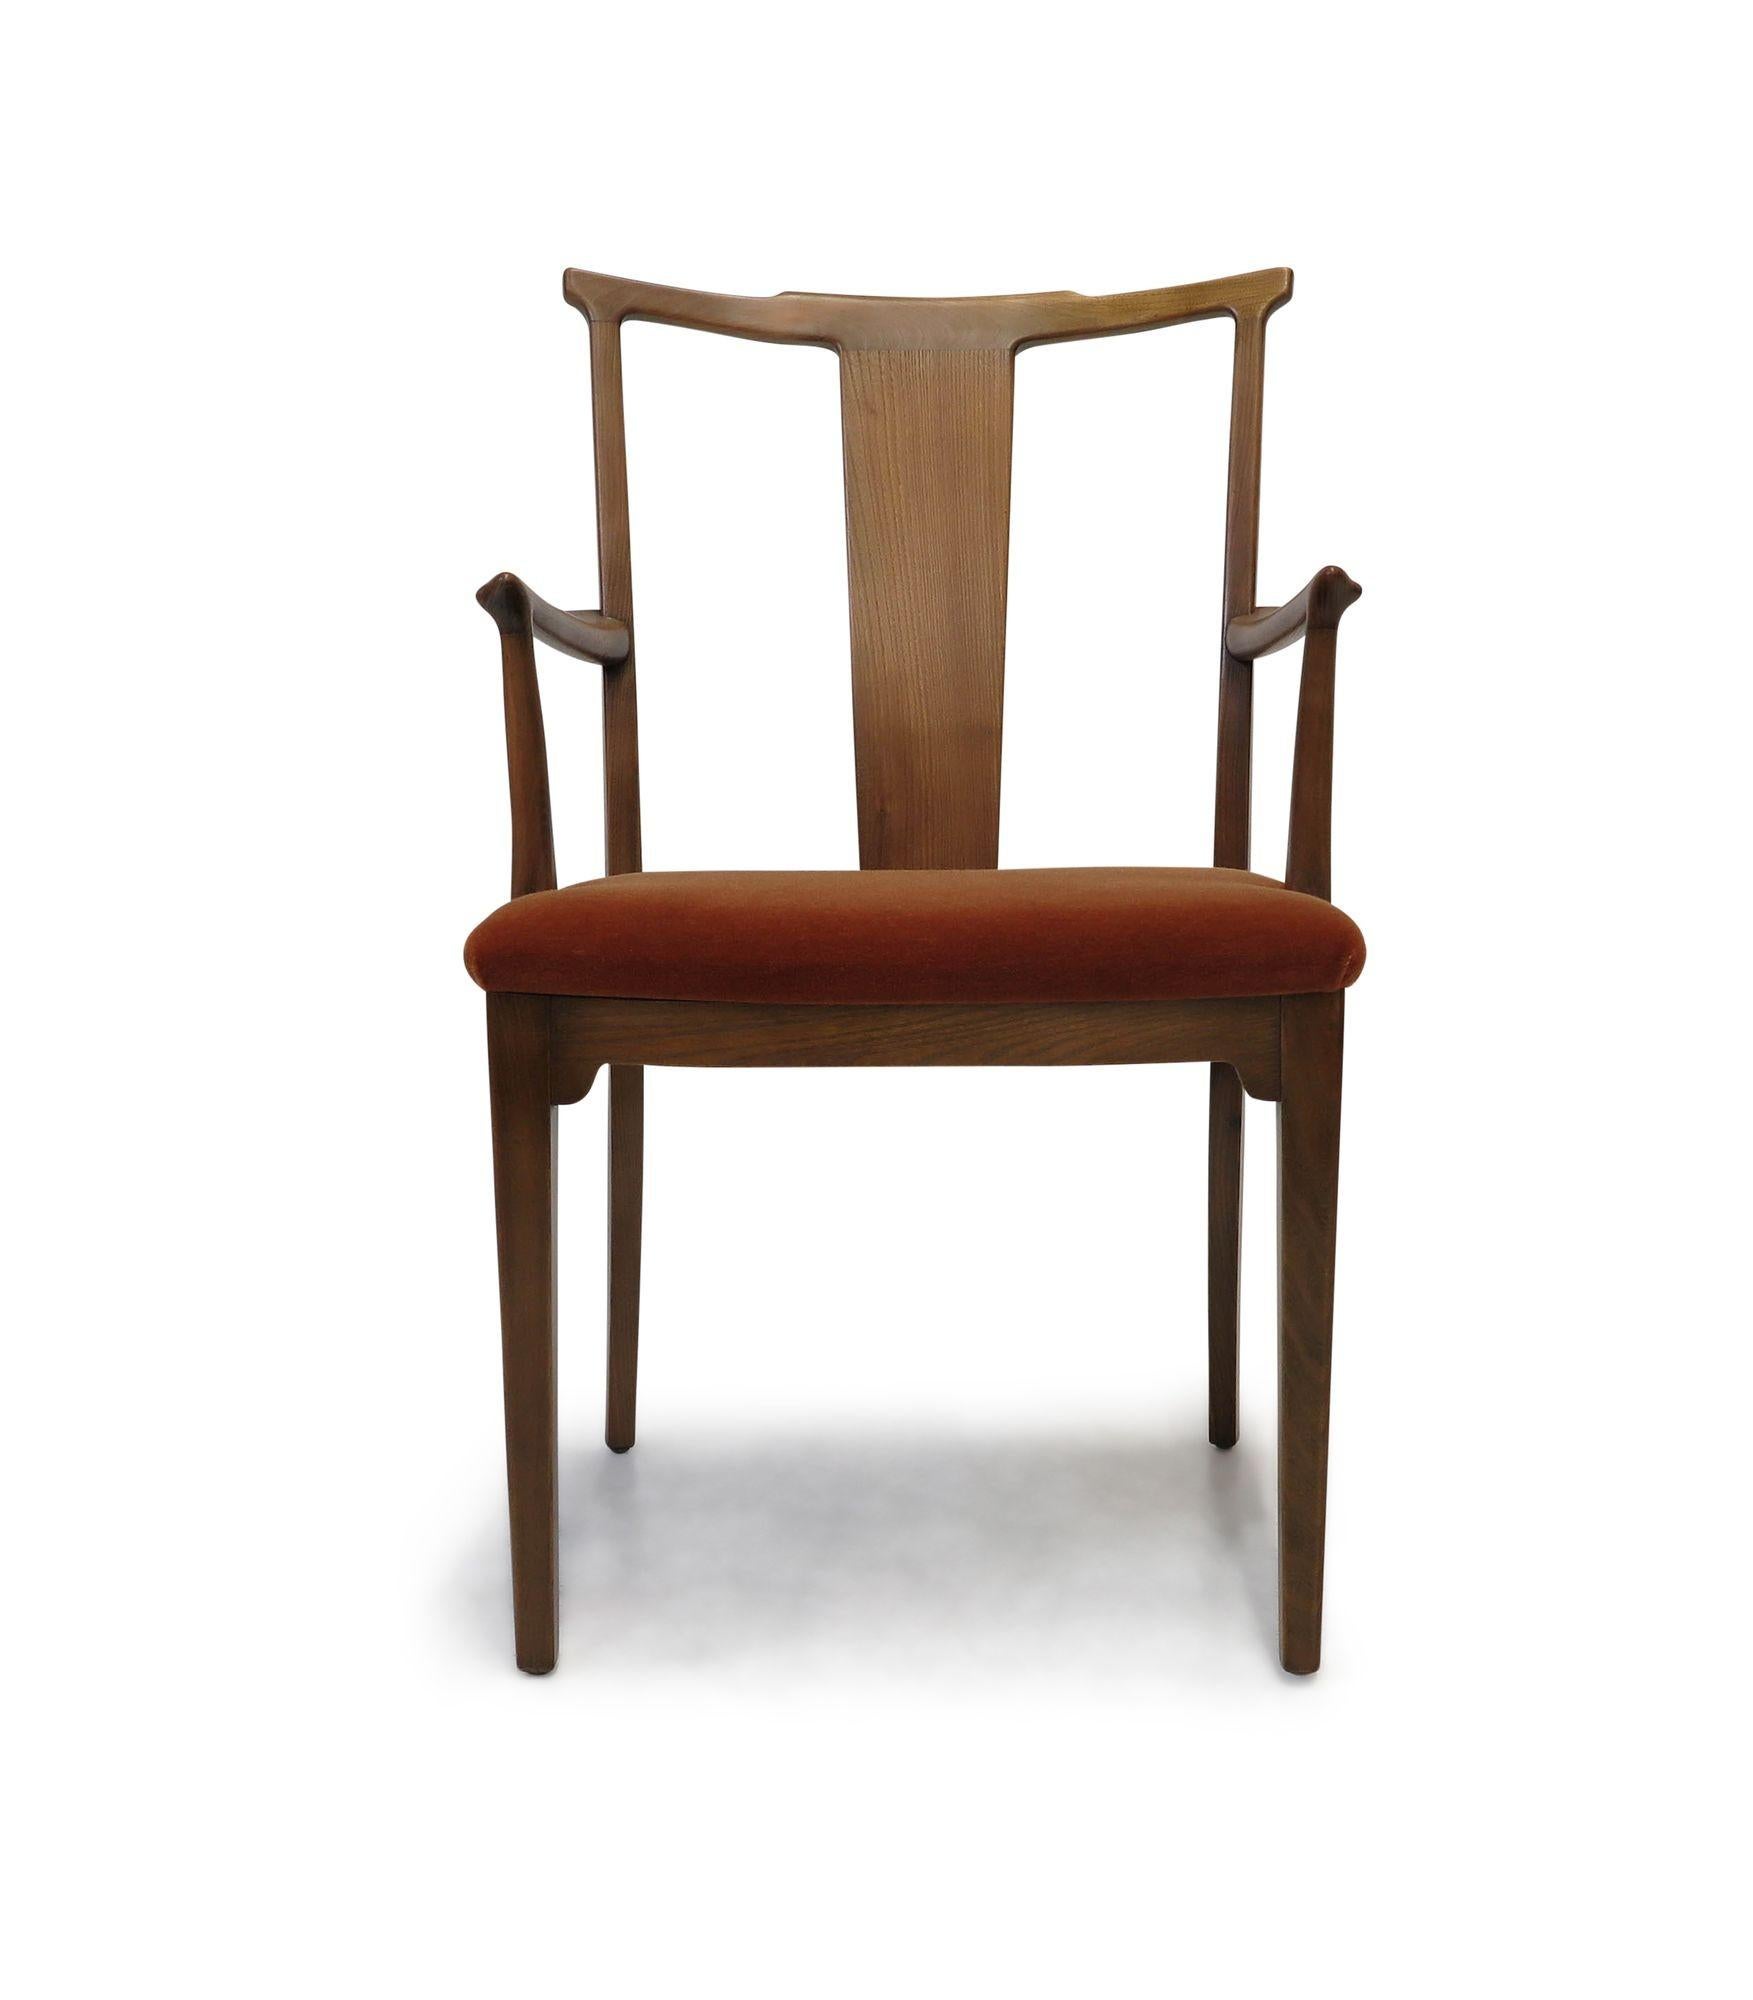 Pair of Ole Wanscher armchairs,1938, Denmark. Each chair is handcrafted in a sculptural form and upholstered in mohair. These armchairs provide comfort and distinction, bringing a statement of elegance to any decor. The chairs are fully restored and